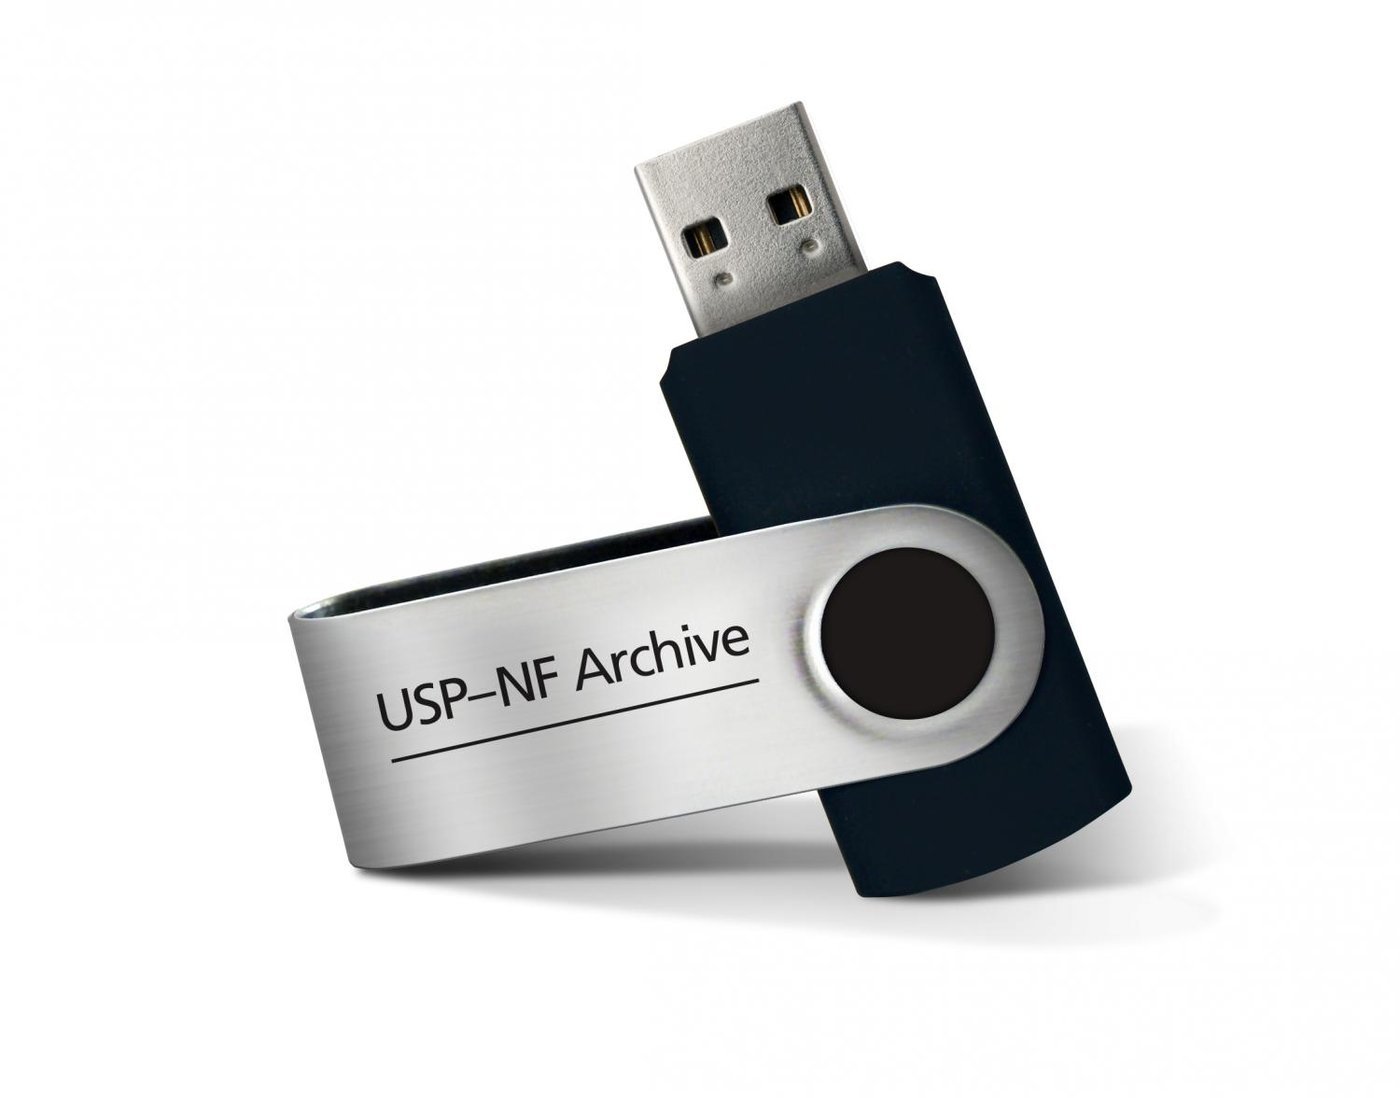 USP-NF Archive USP39-NF34
United States Pharmacopoeia and National Formulary
single user, USB-Stick